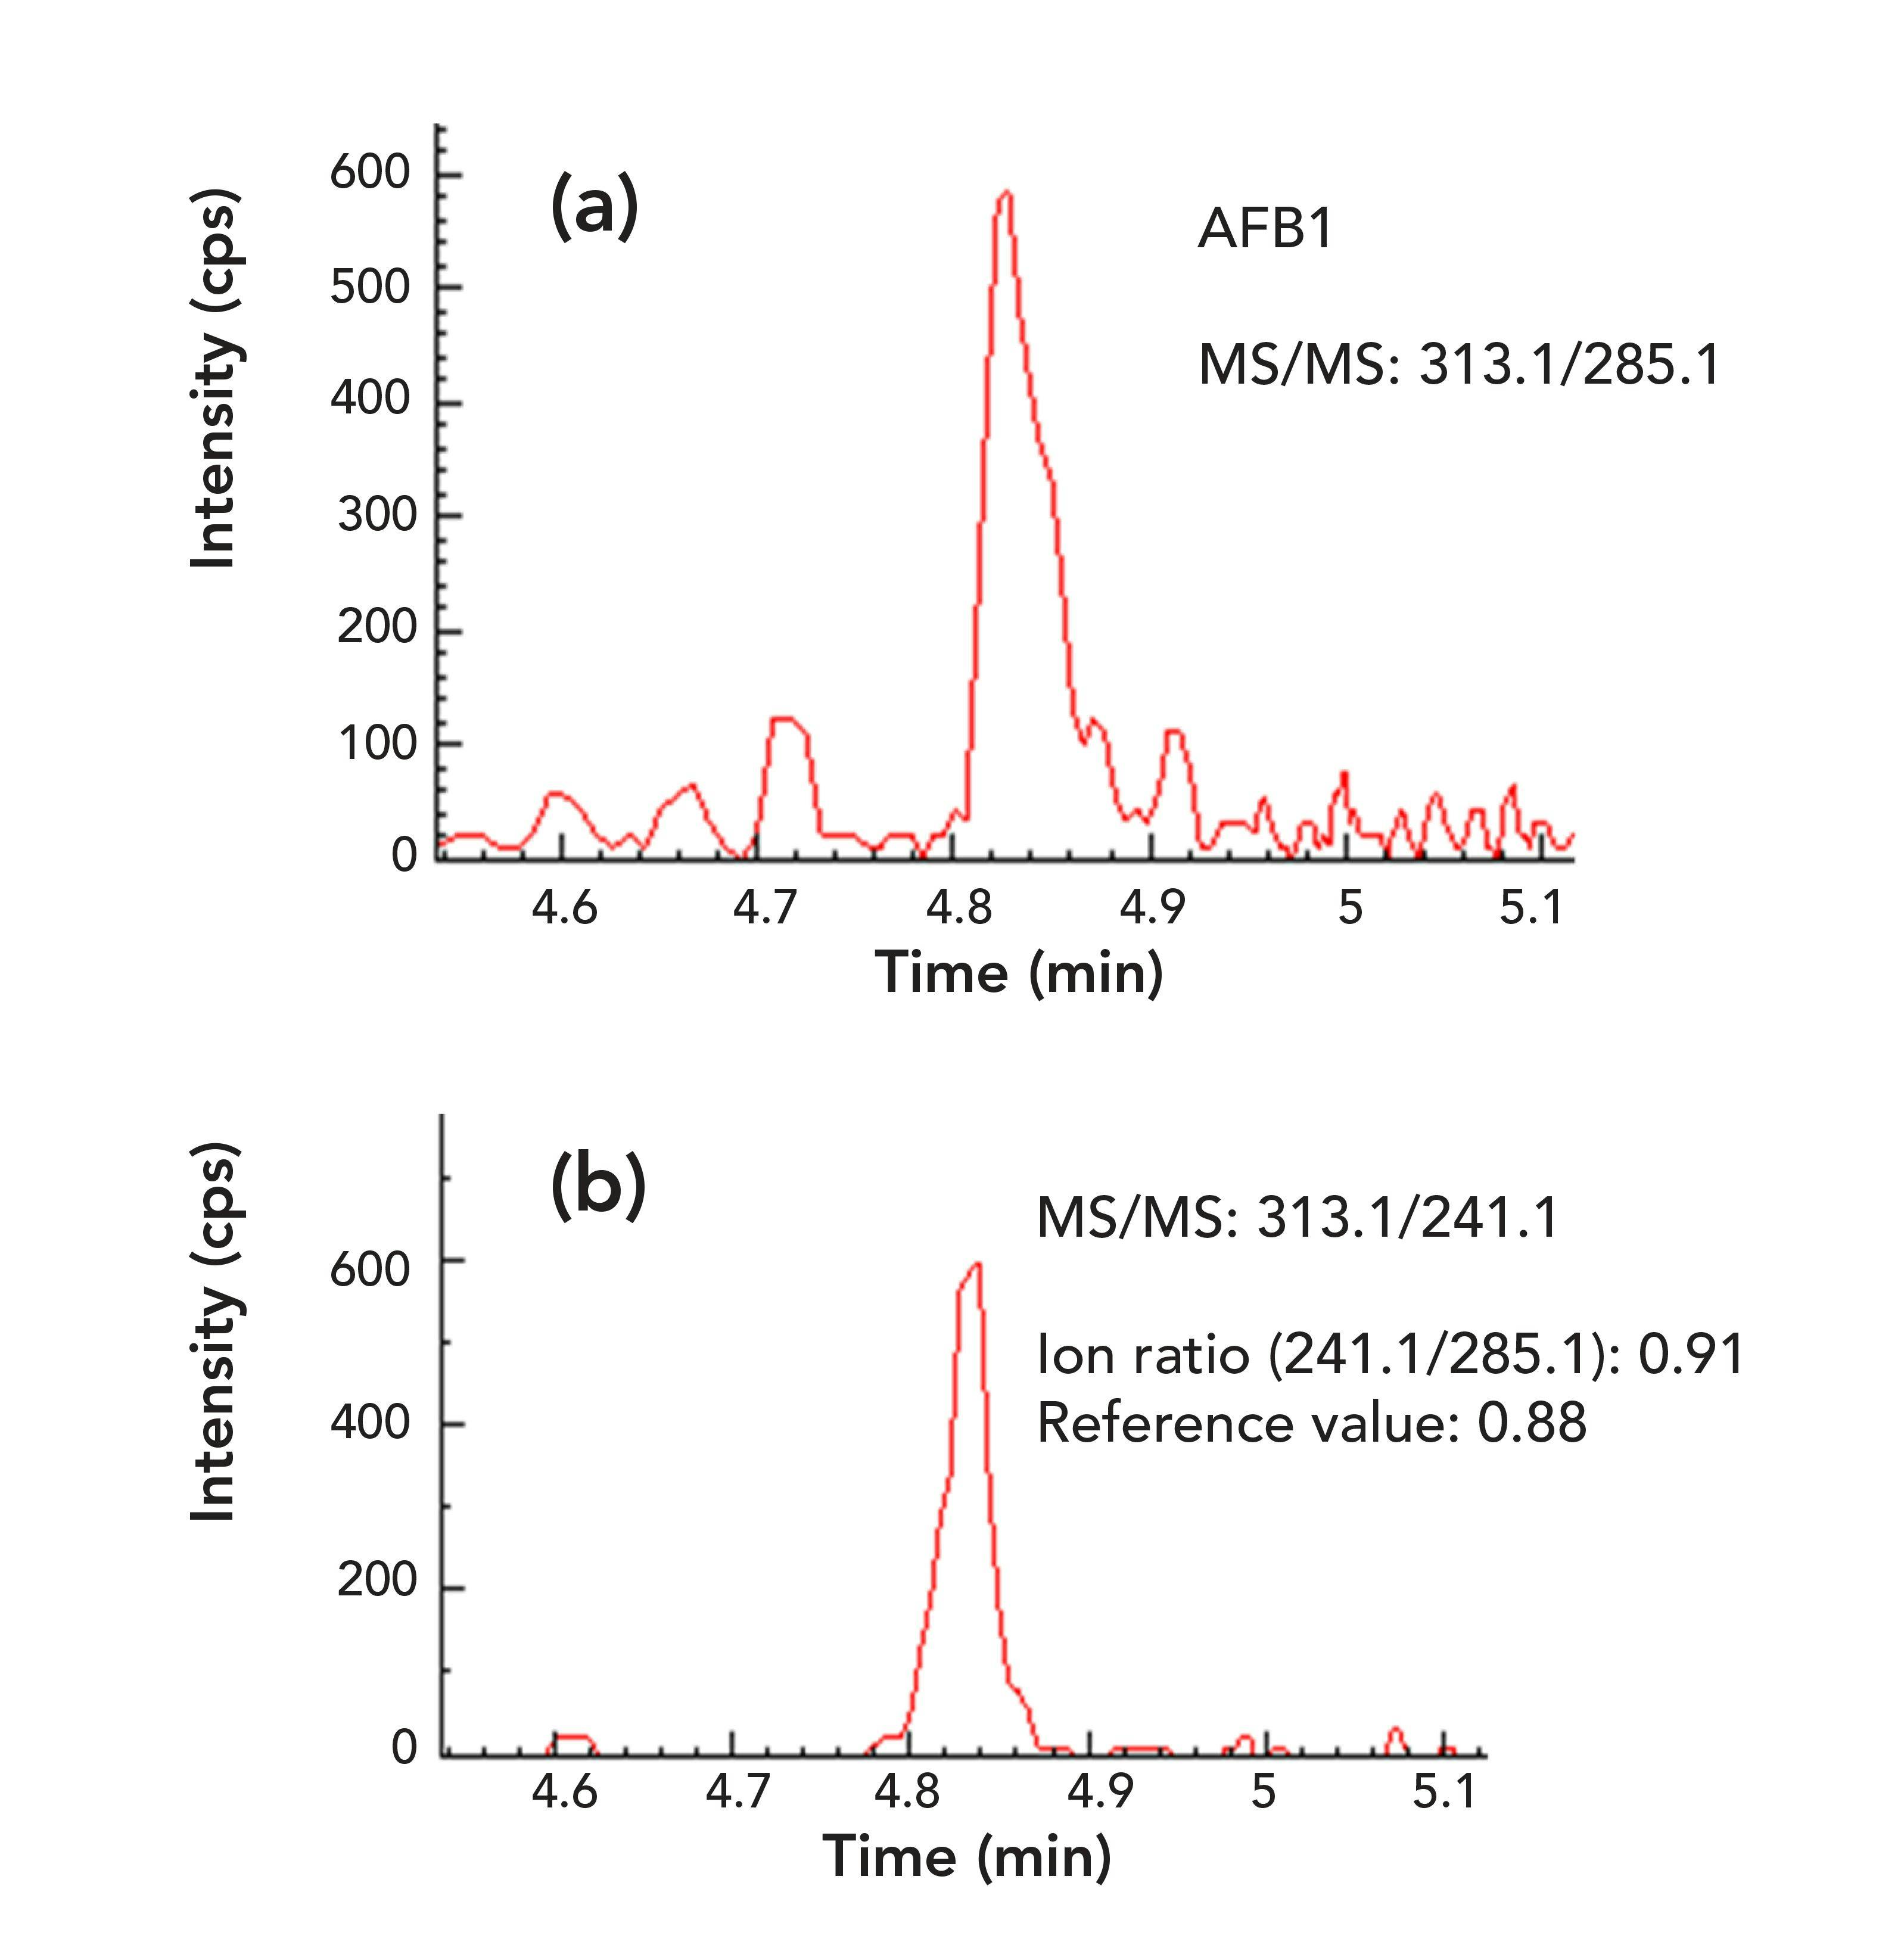 FIGURE 4: (a and b) The two MS/MS chromatograms of AFB1 (0.056 μg/kg) in a chili powder sample.